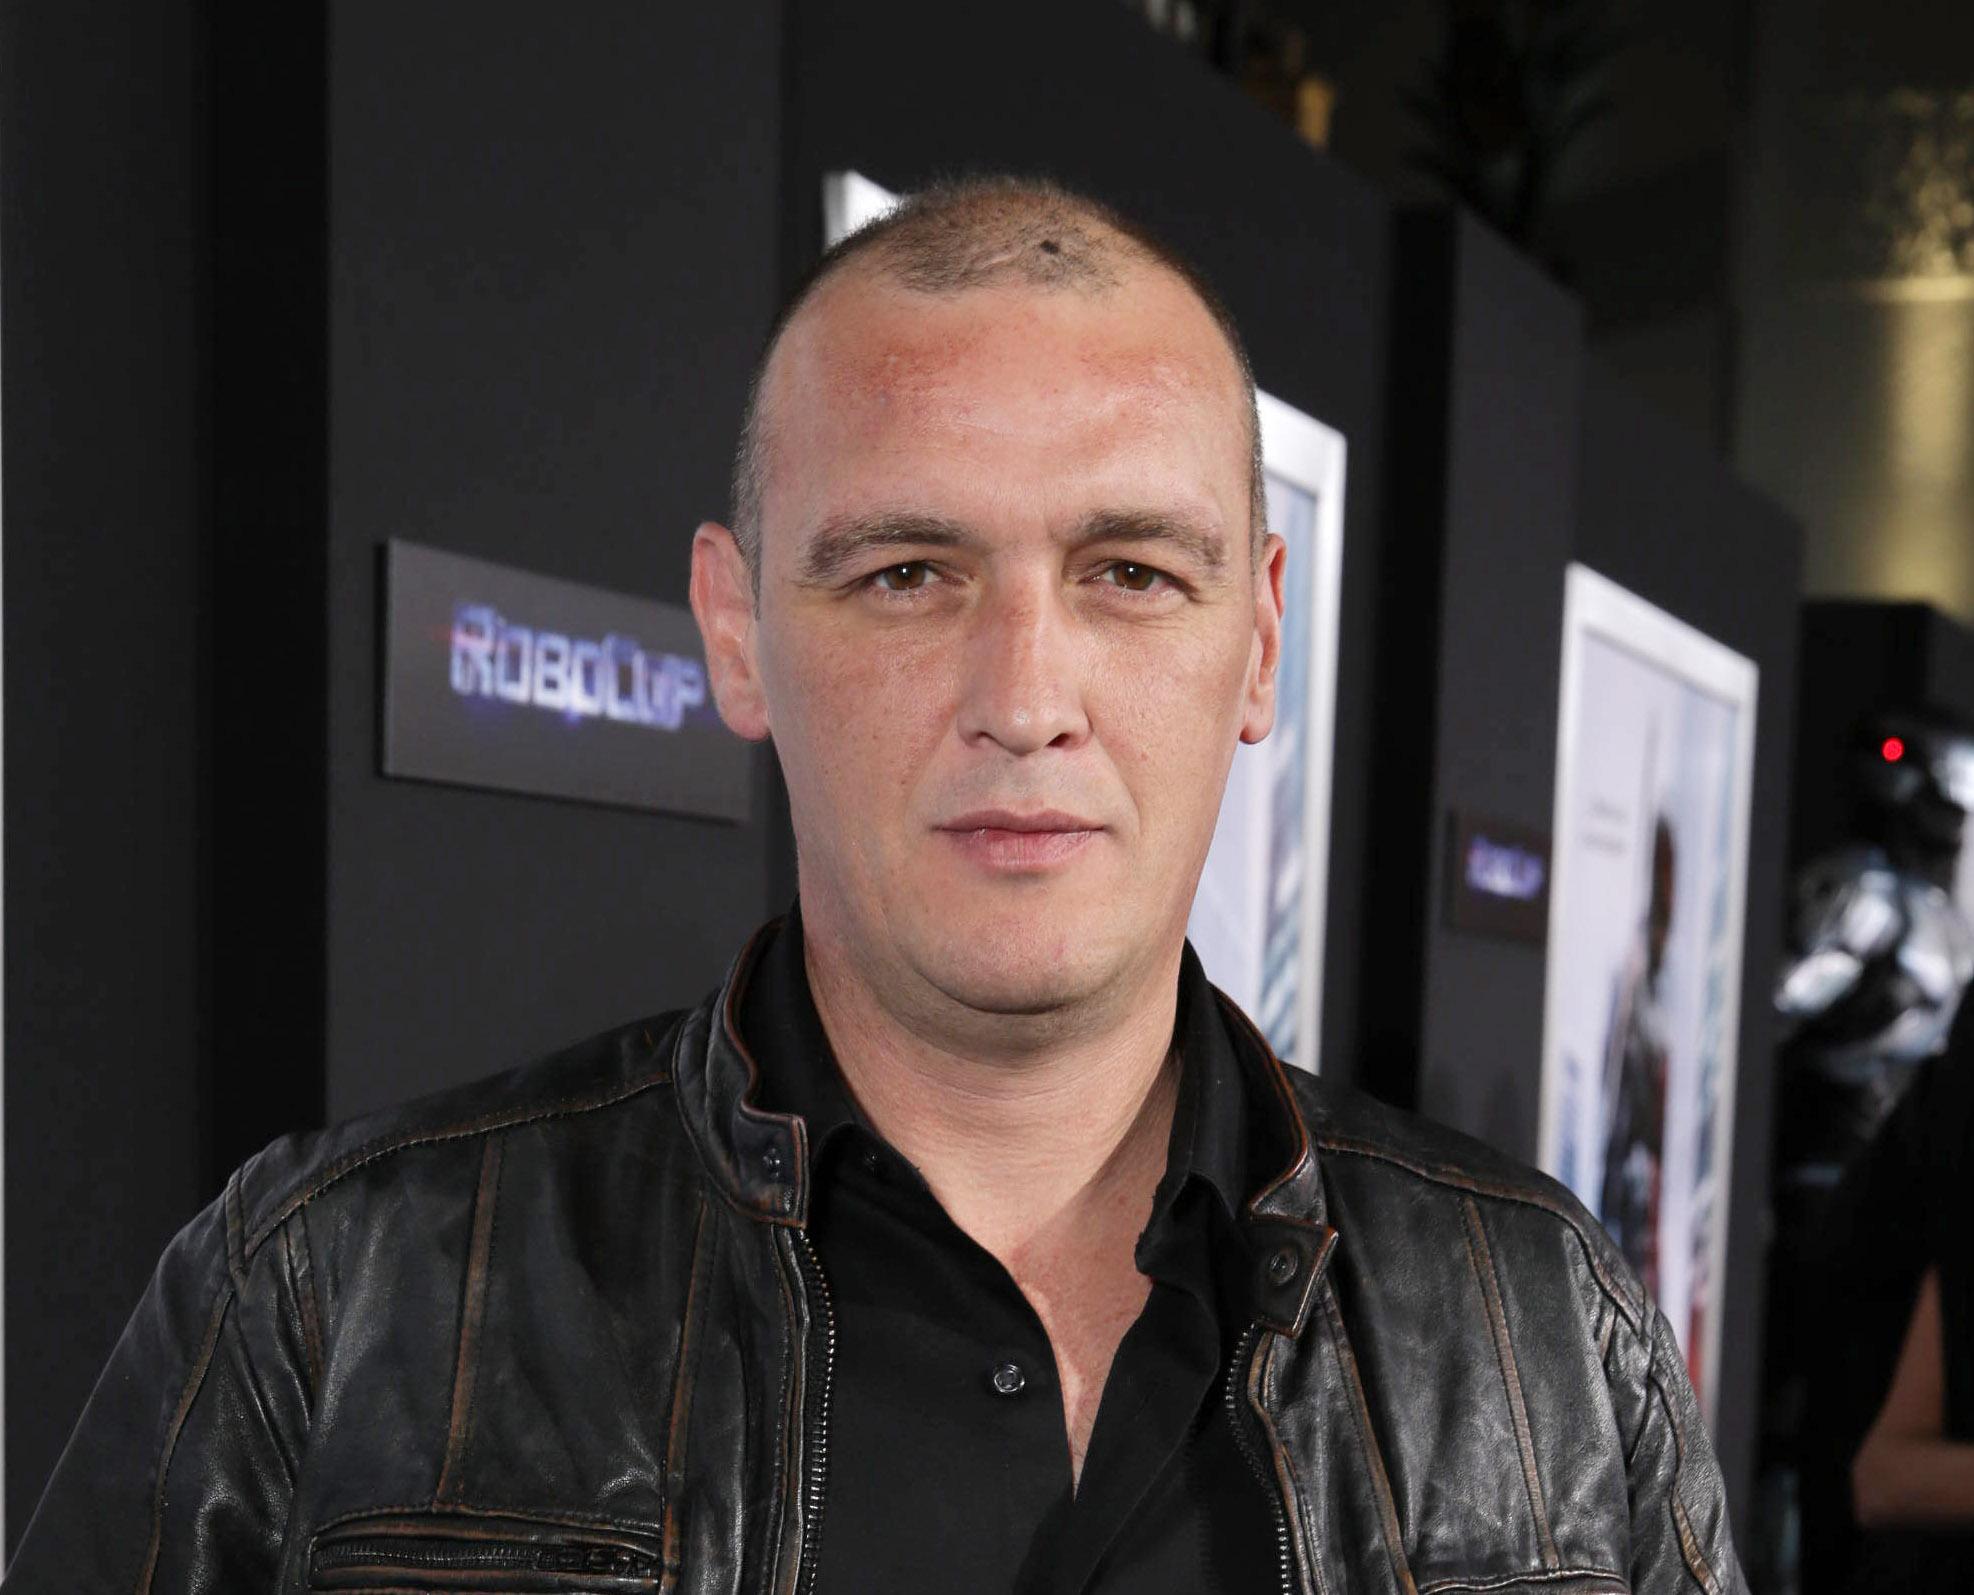 Sons of Anarchy star Alan O'Neill who has died, aged 47